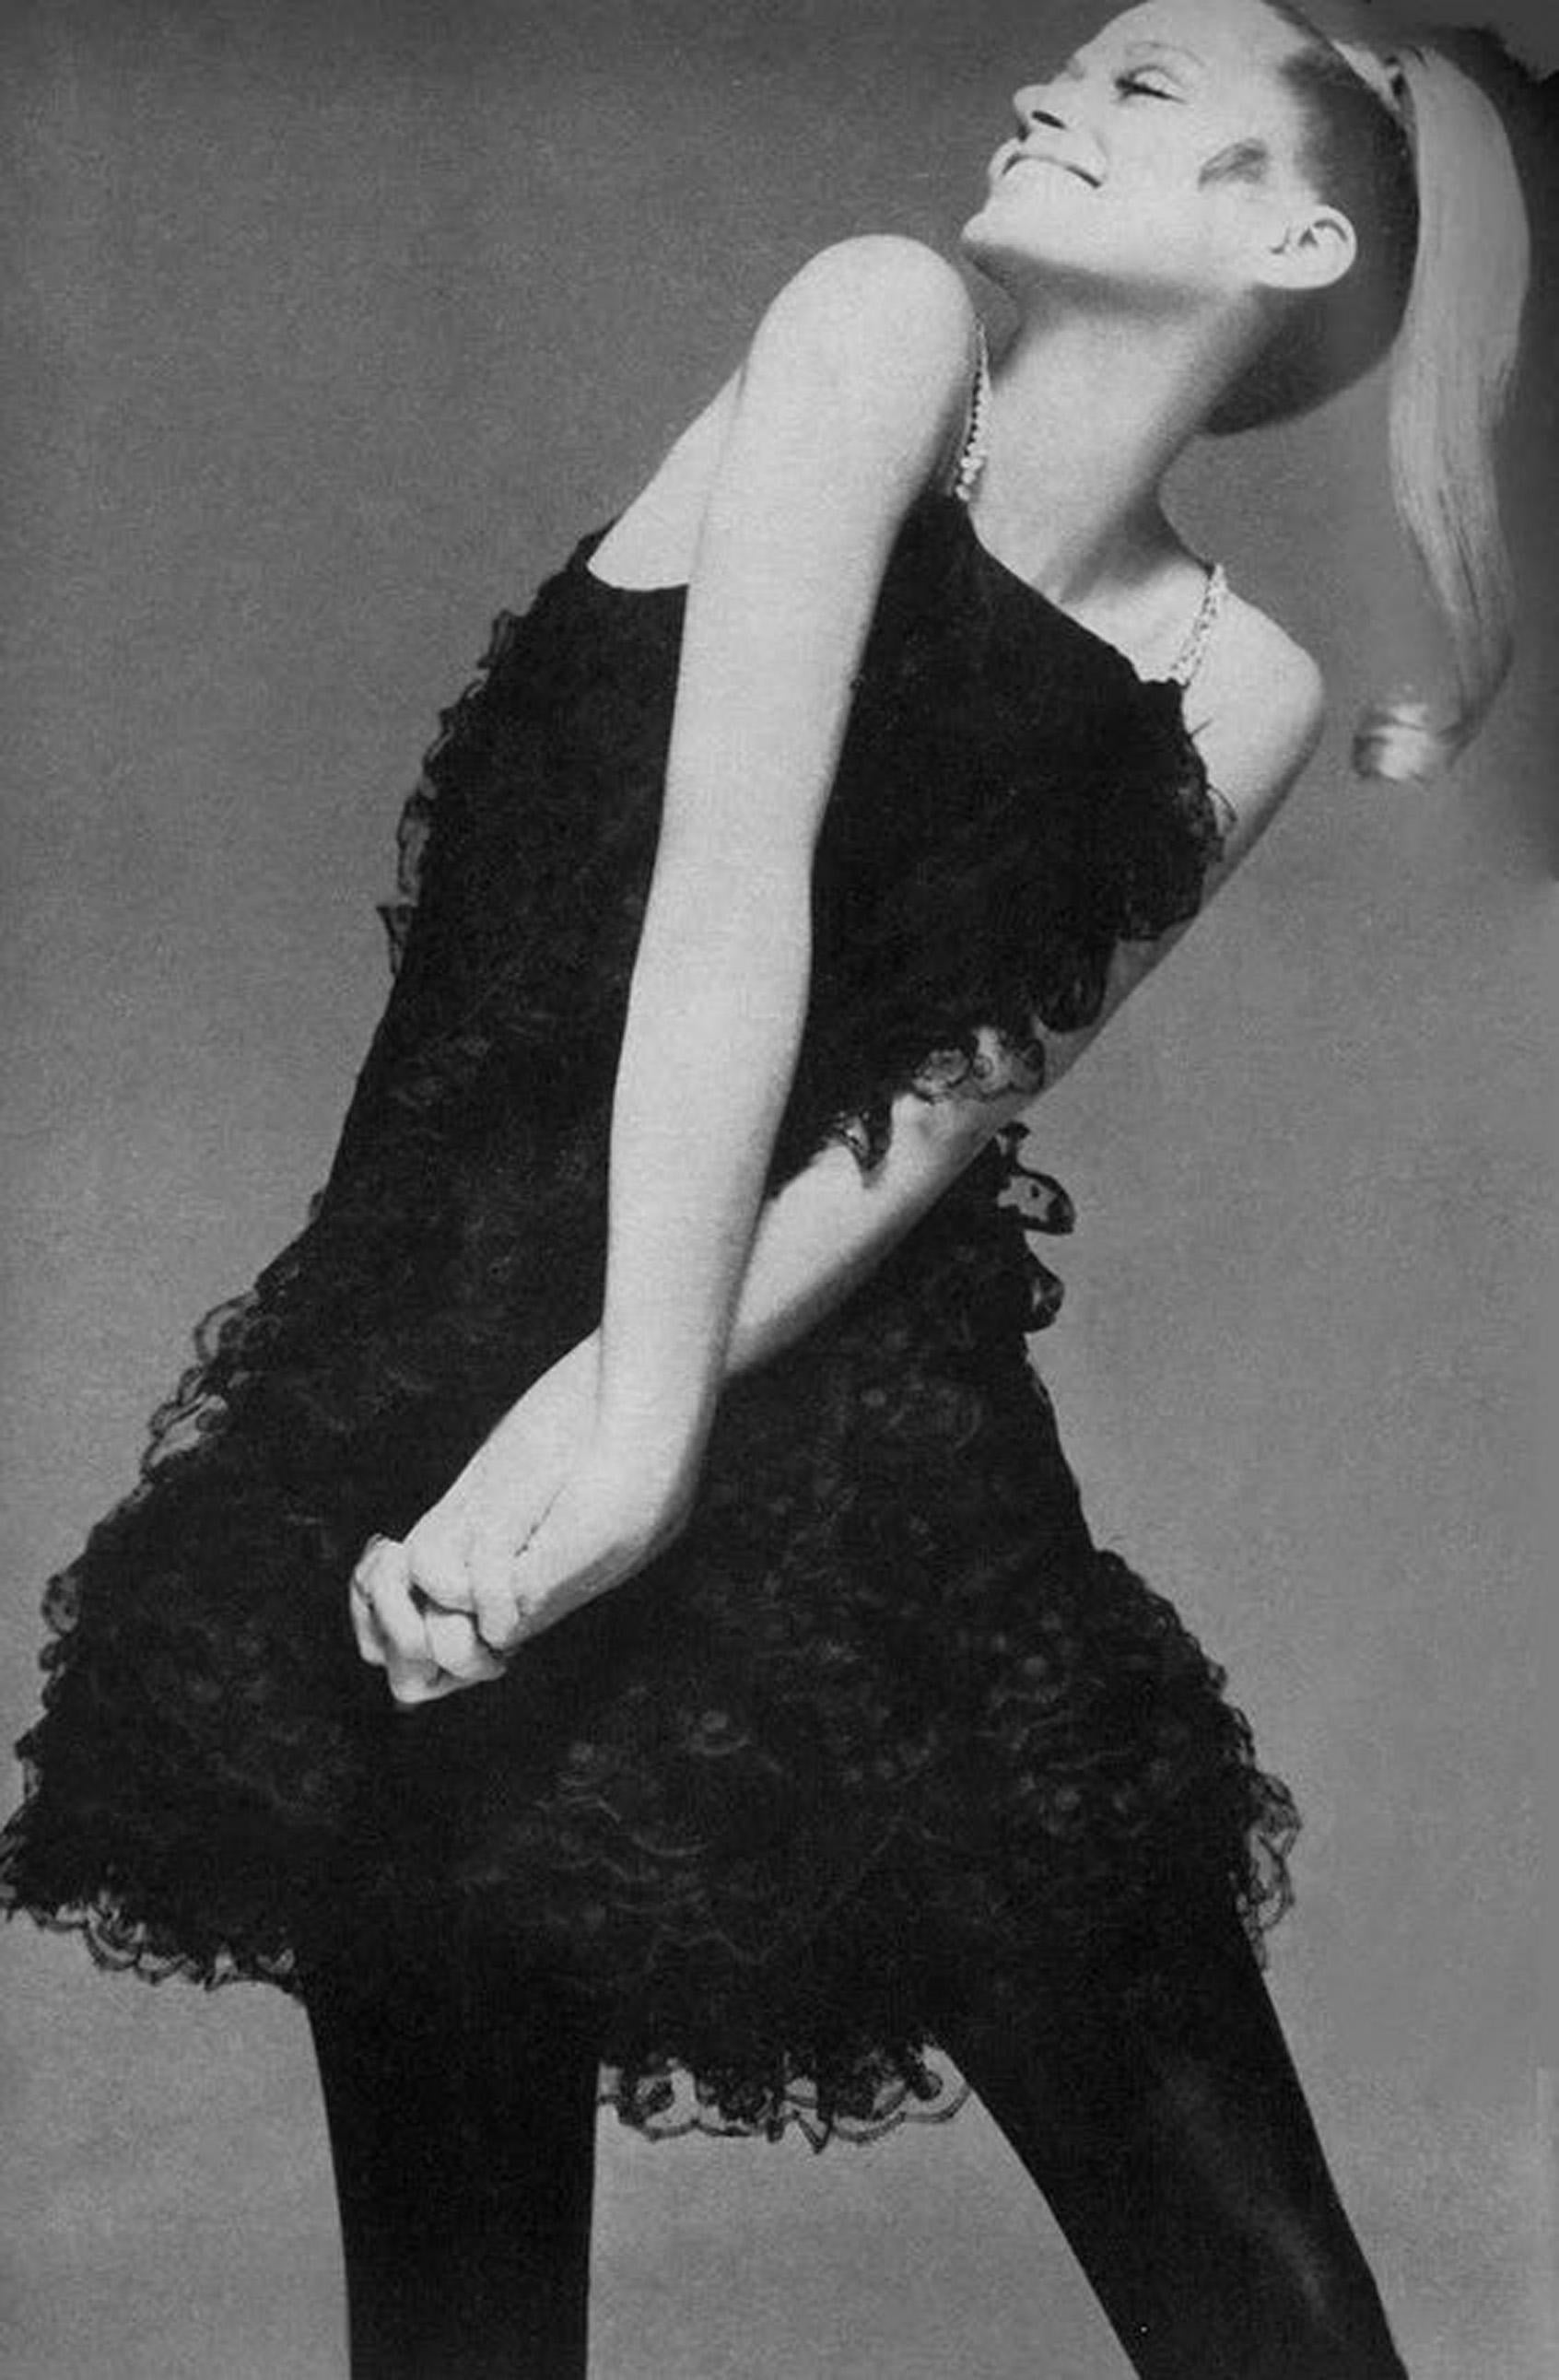 An important and well-documented Galanos black polka-dot net lace cocktail dress dating back to fall-winter 1967. As shown, the beautiful Lauren Hutton graced the pages of Vogue wearing this mod showstopper. Dedication to excellence in craftsmanship